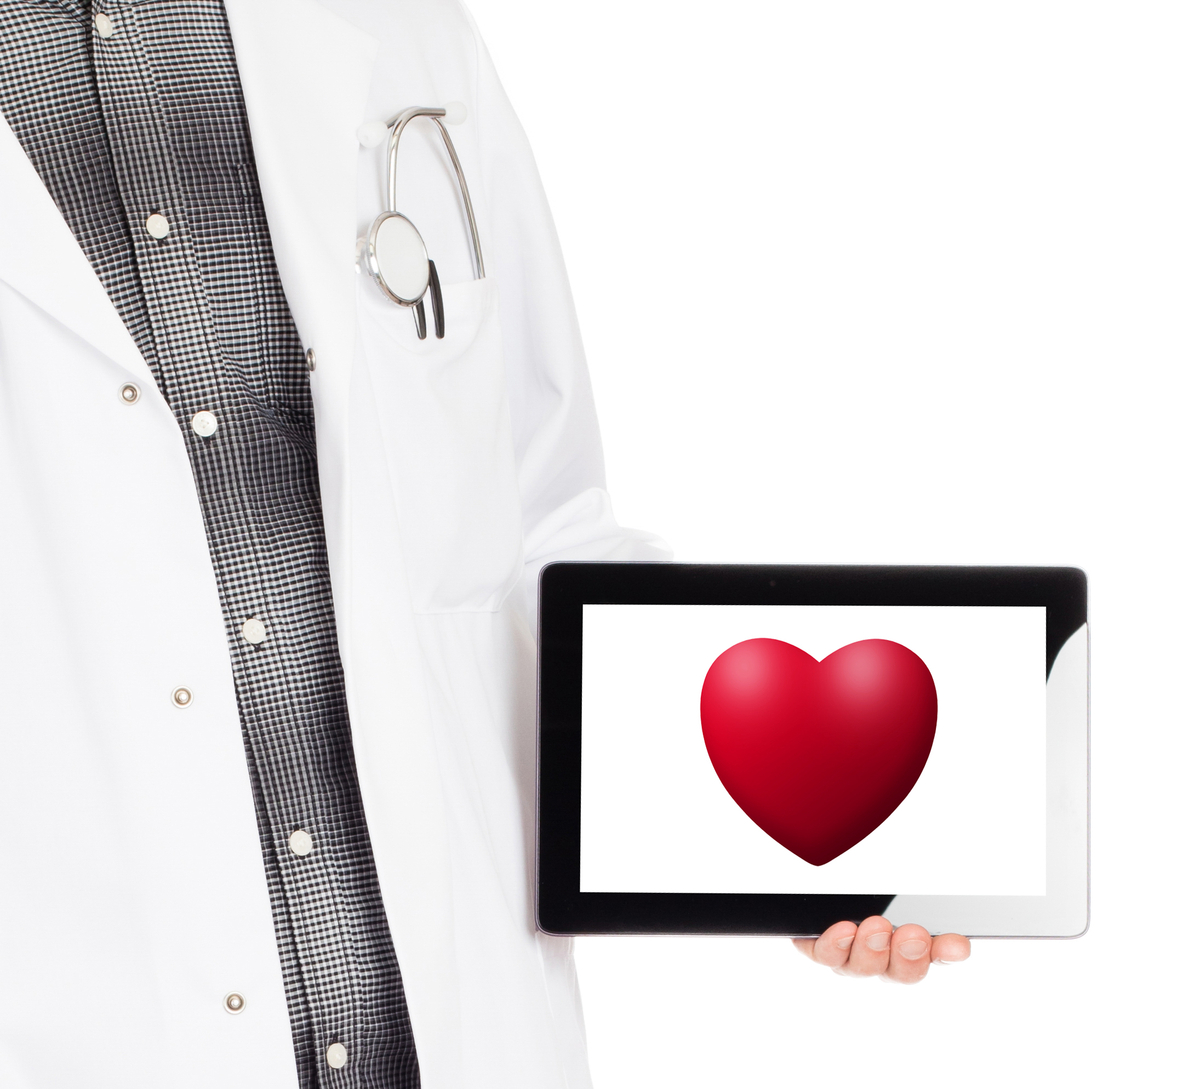 heart doctor holding a tablet with image of a heart